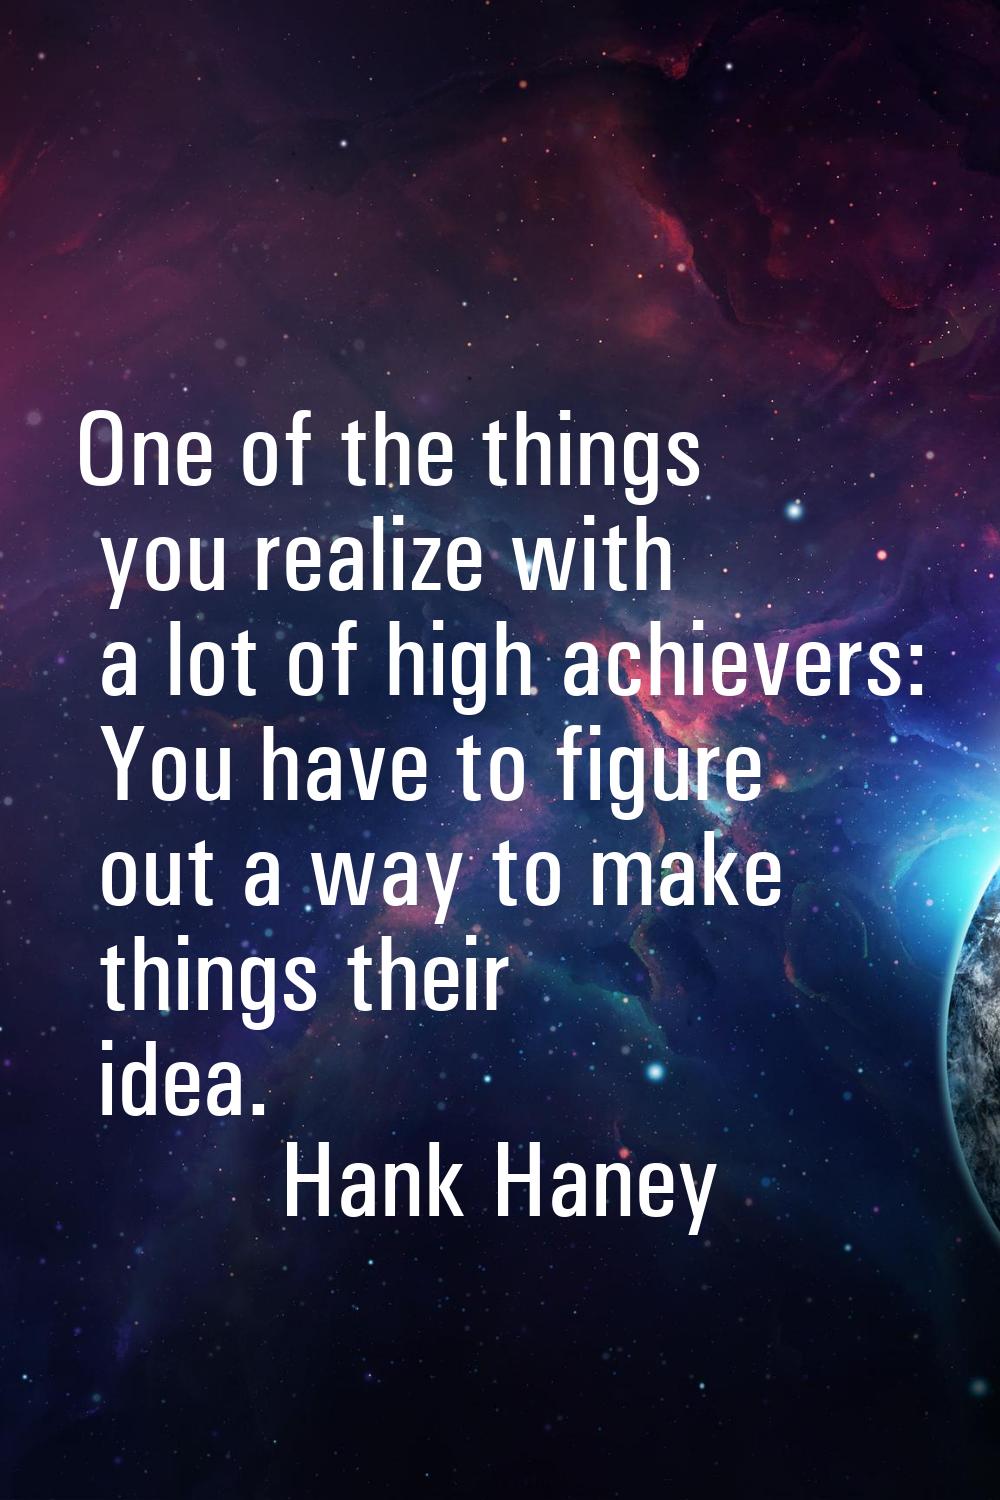 One of the things you realize with a lot of high achievers: You have to figure out a way to make th